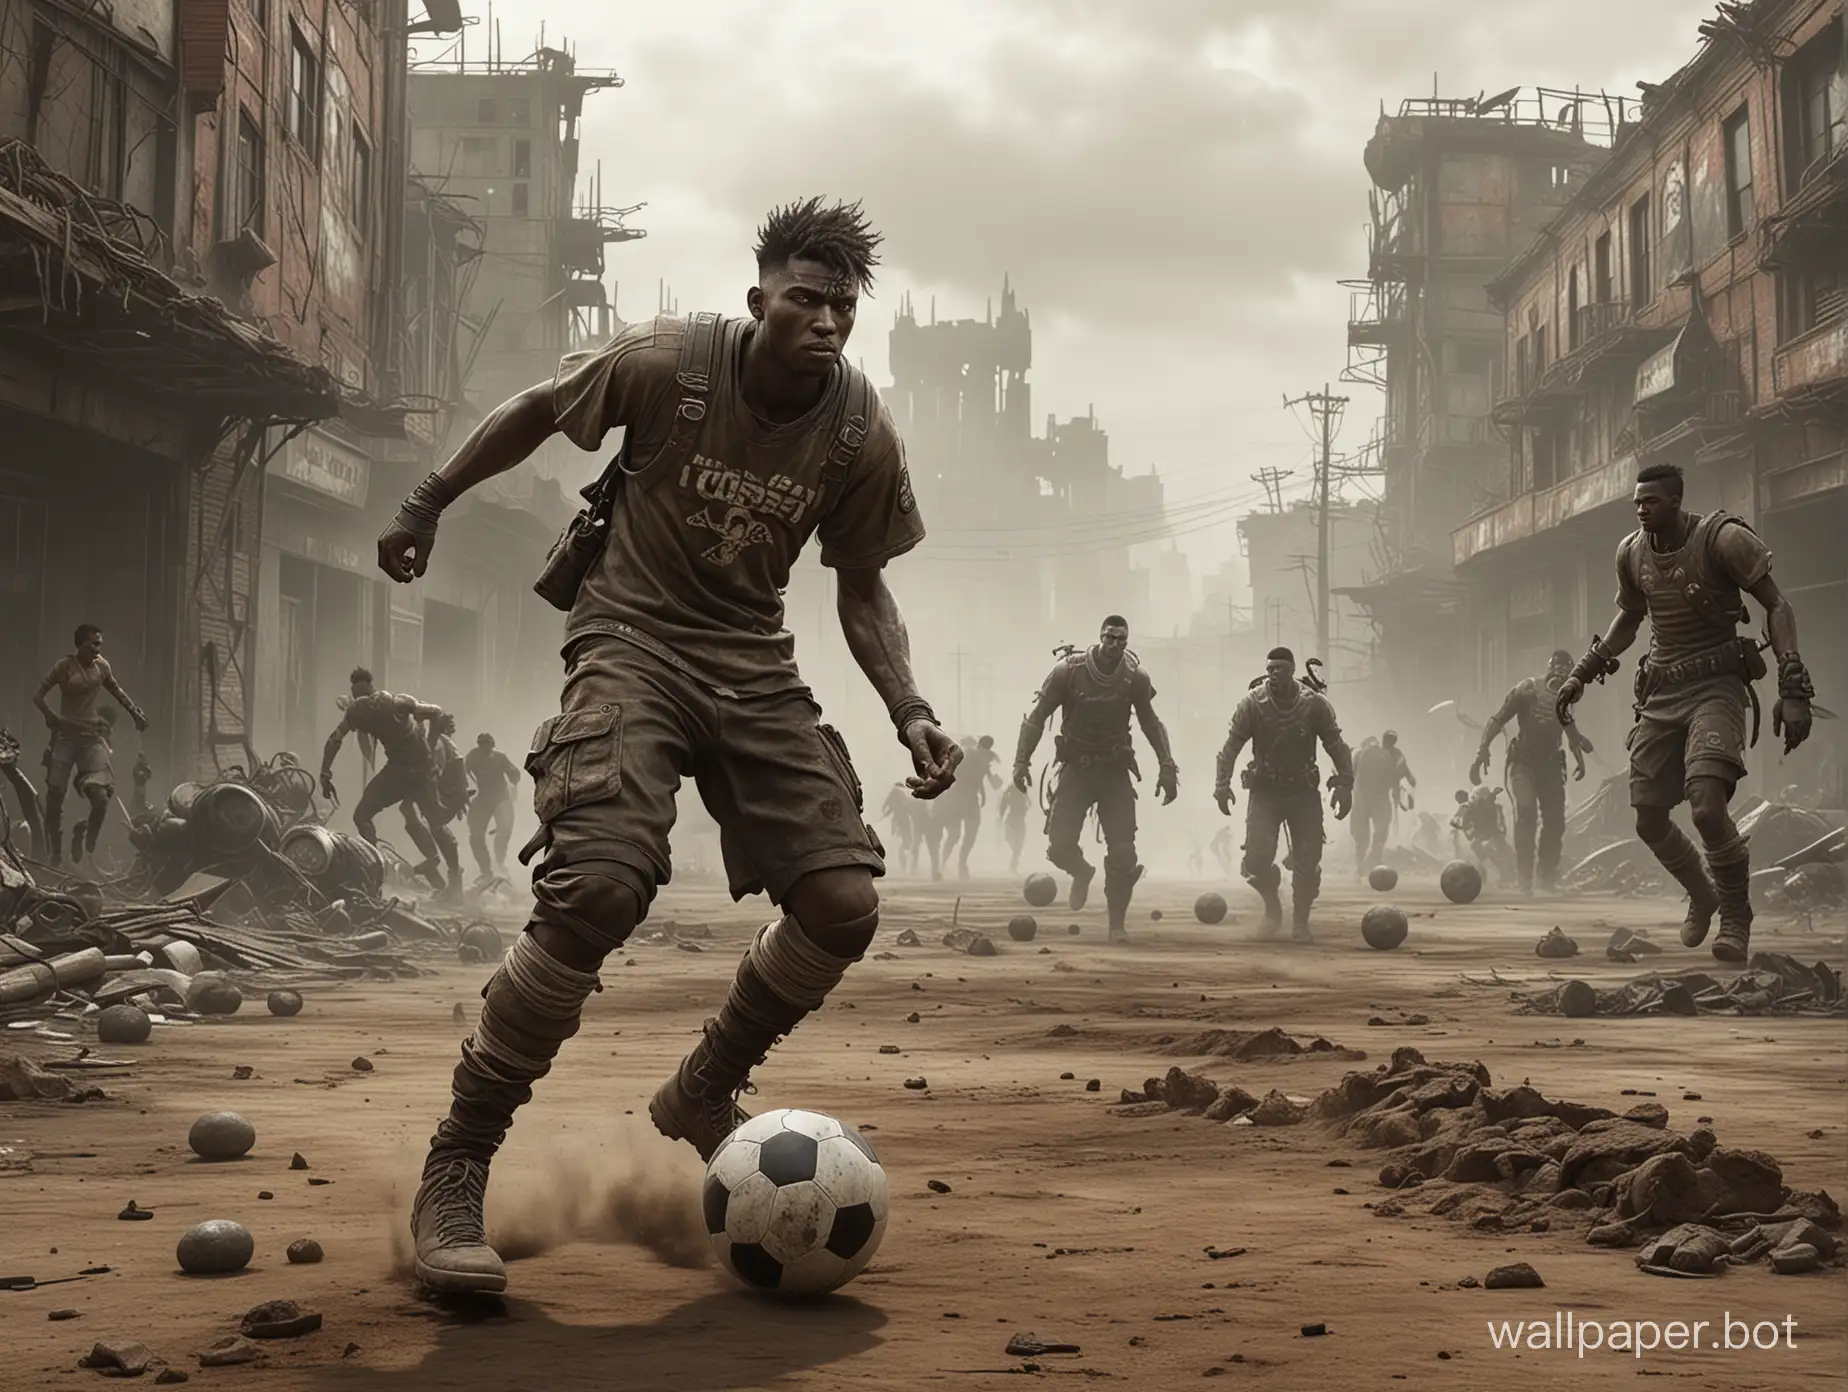 PostApocalyptic-Football-Players-Competing-Amidst-Ruins-Luis-Royo-Style